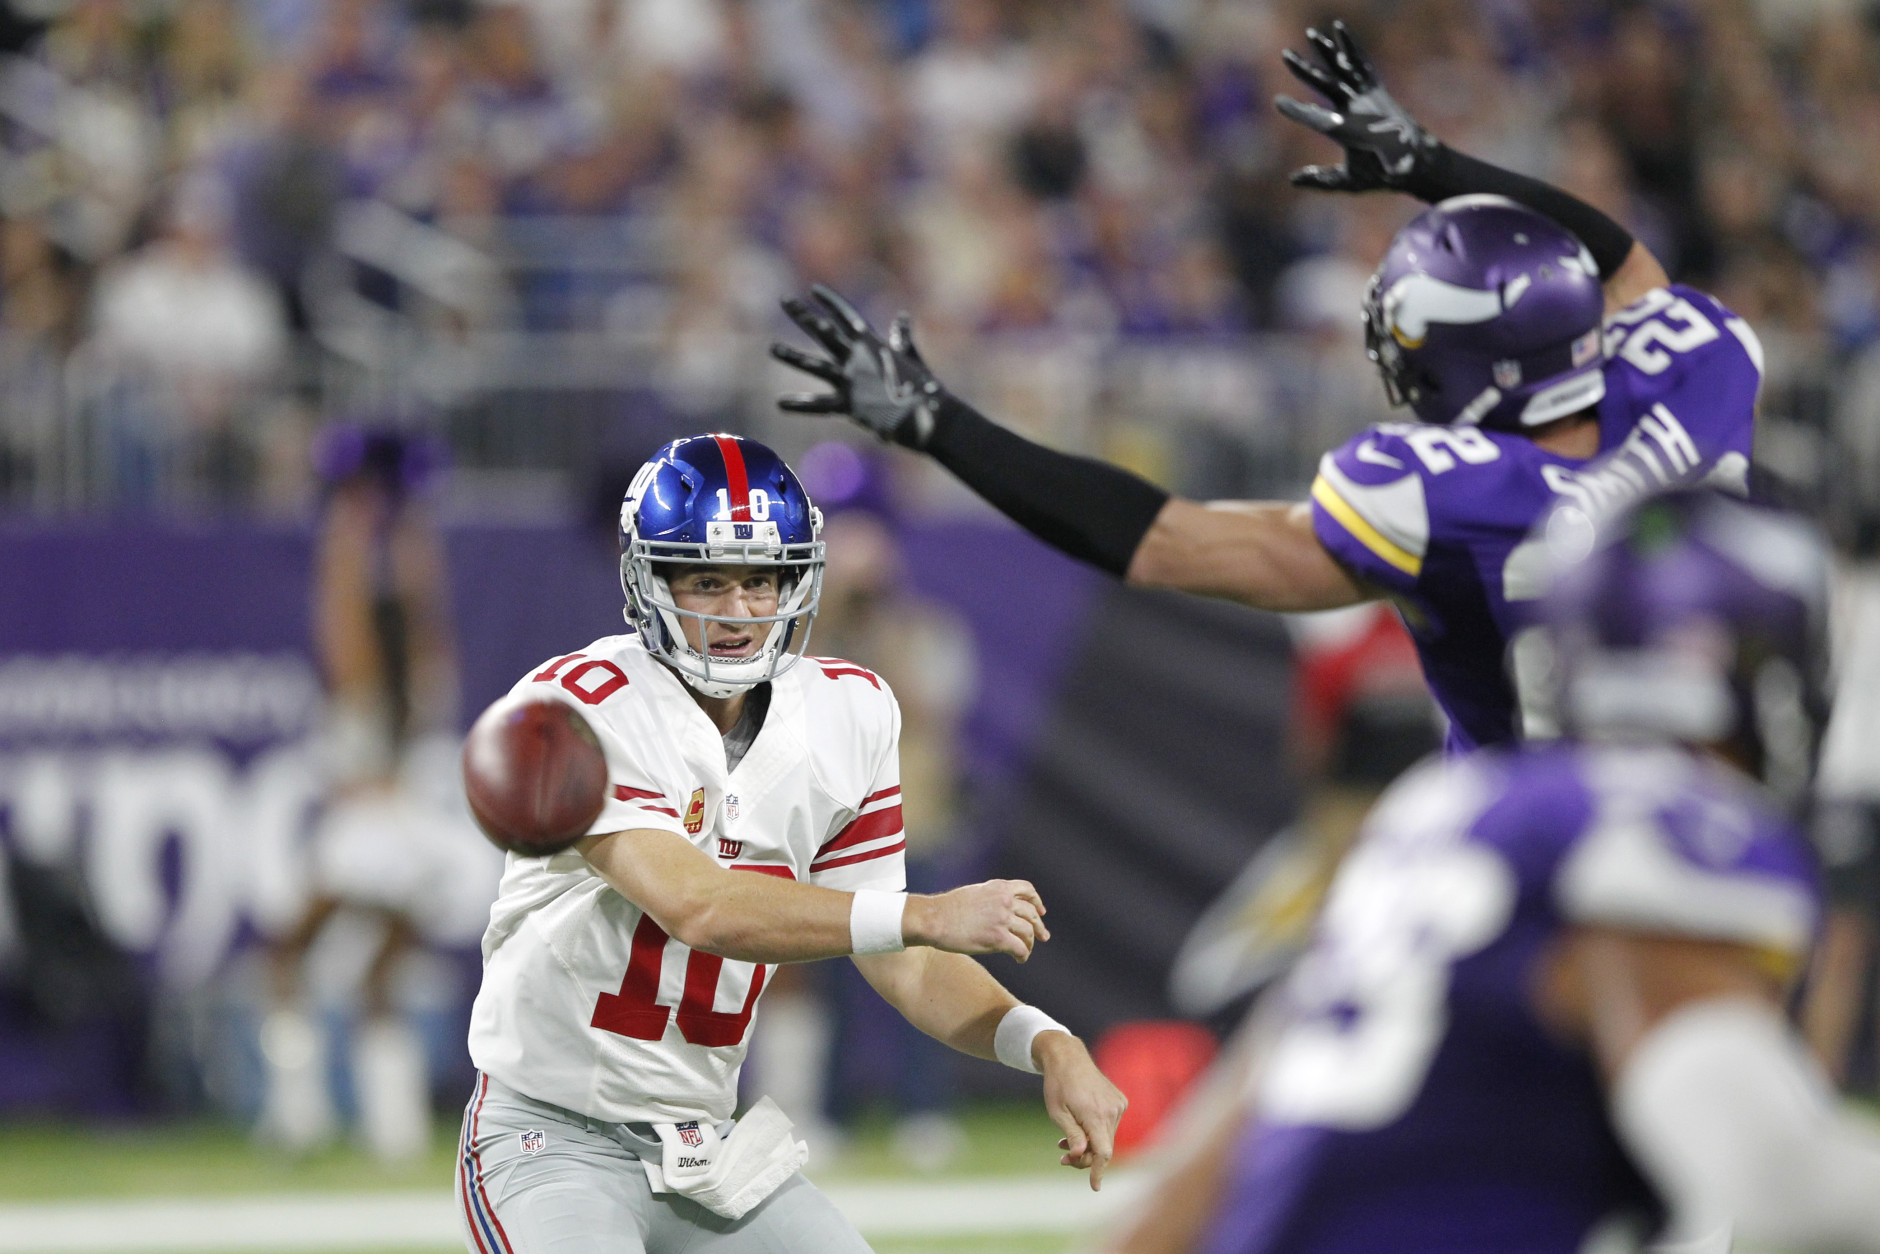 New York Giants quarterback Eli Manning, left, throws a pass around Minnesota Vikings free safety Harrison Smith (22) during the first half of an NFL football game Monday, Oct. 3, 2016, in Minneapolis. (AP Photo/Andy Clayton-King)